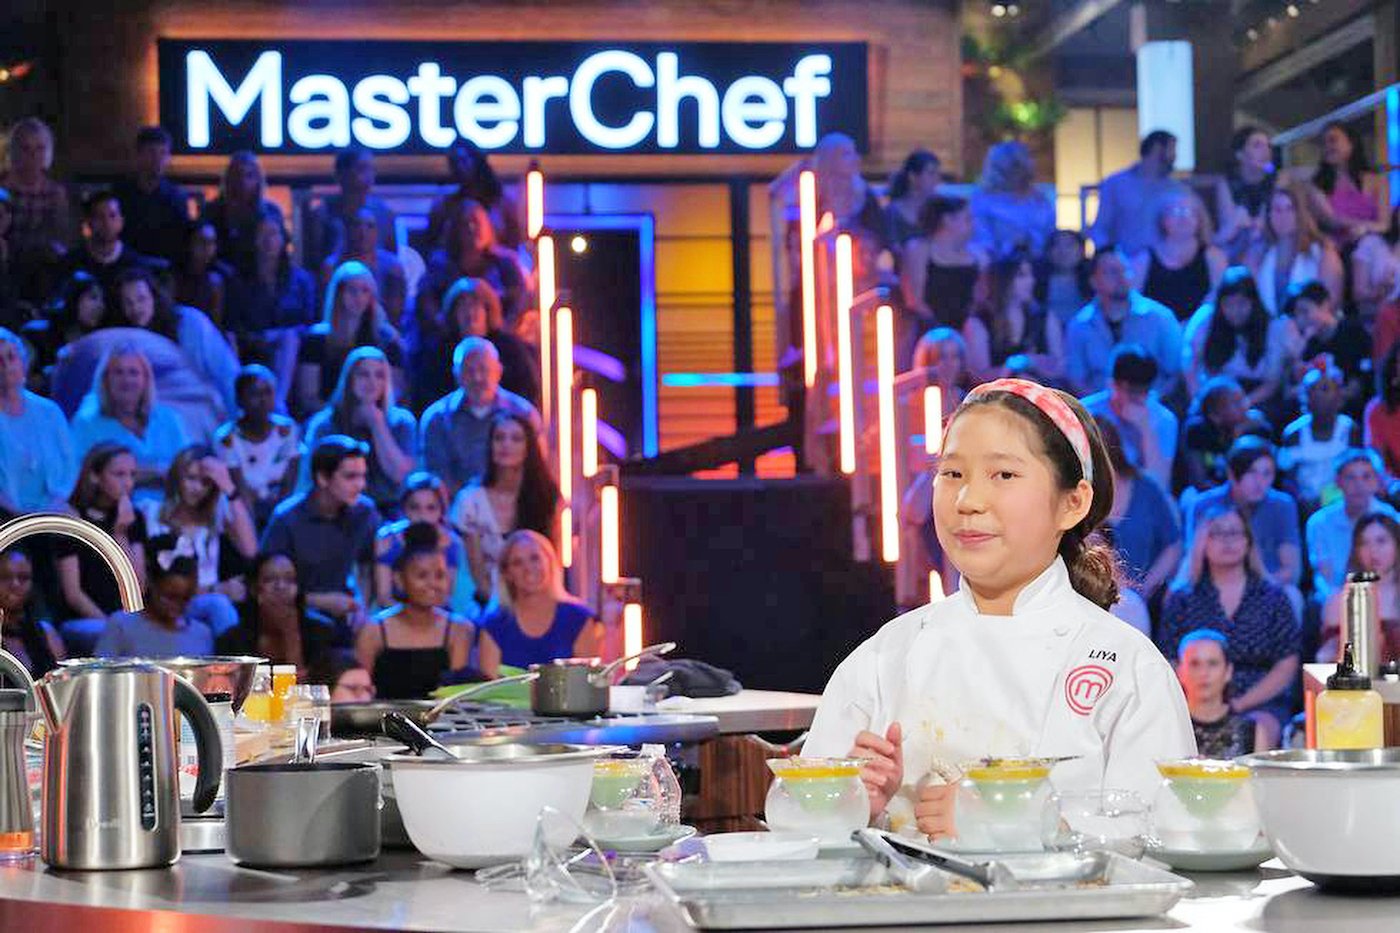 ‘MasterChef Junior’ Opens Auditions in Search of the Next Superstar – Find out How to Be Cast on the Show